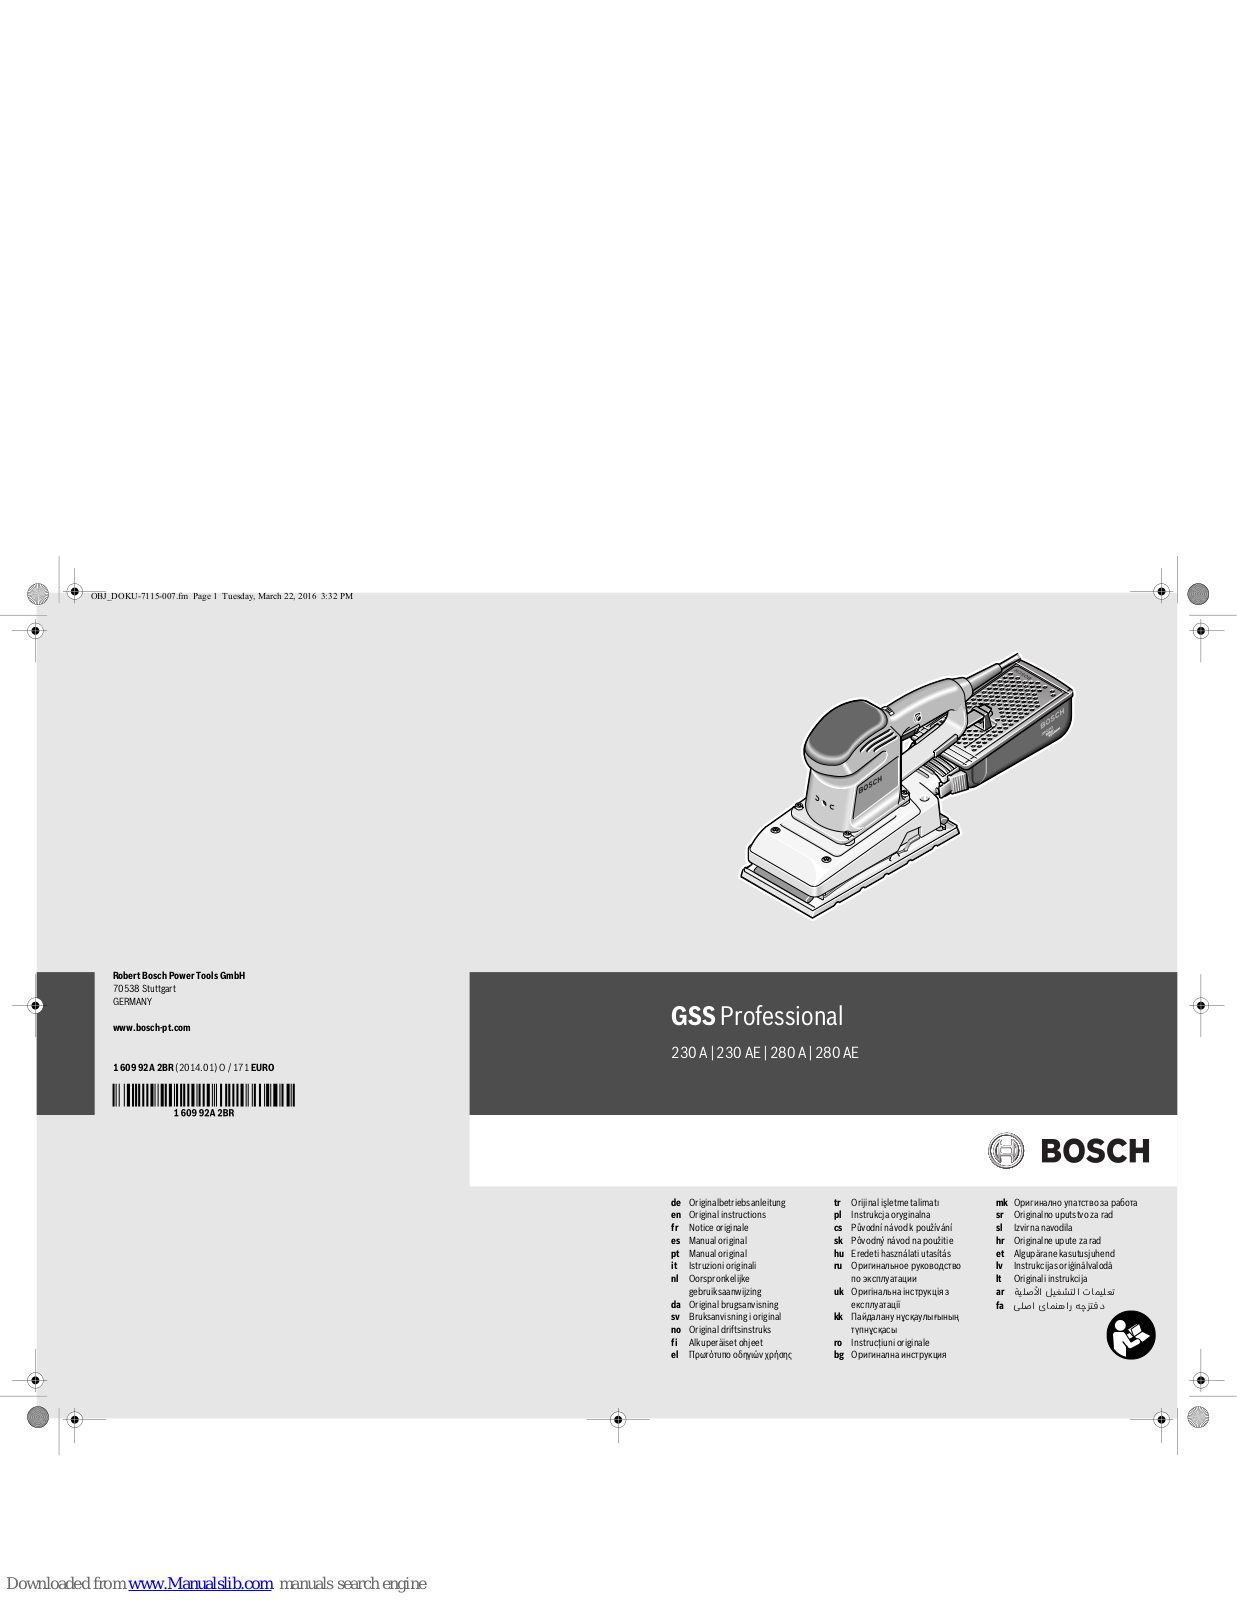 Bosch GSS 230A Professional, GSS 230AE Professional, GSS 280A Professional, GSS 280AE Professional Original Instructions Manual